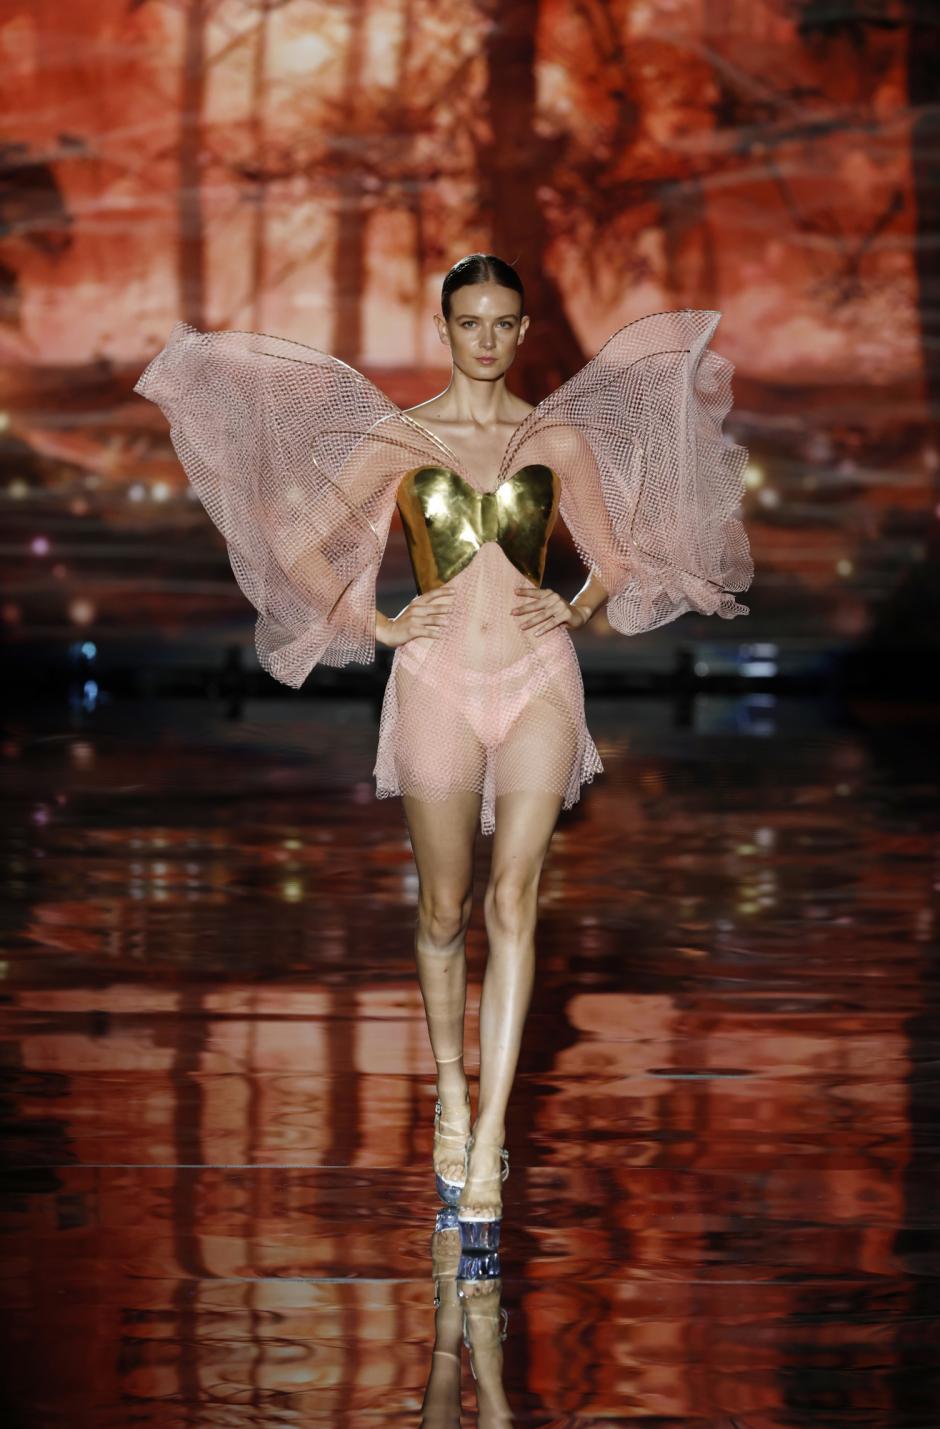 U517856  A model wears at collection runway a creation from “ Andres Sarda “ during Pasarela Cibeles Mercedes-Benz Fashion Week Madrid 2022 in Madrid, on 15 September 2022.